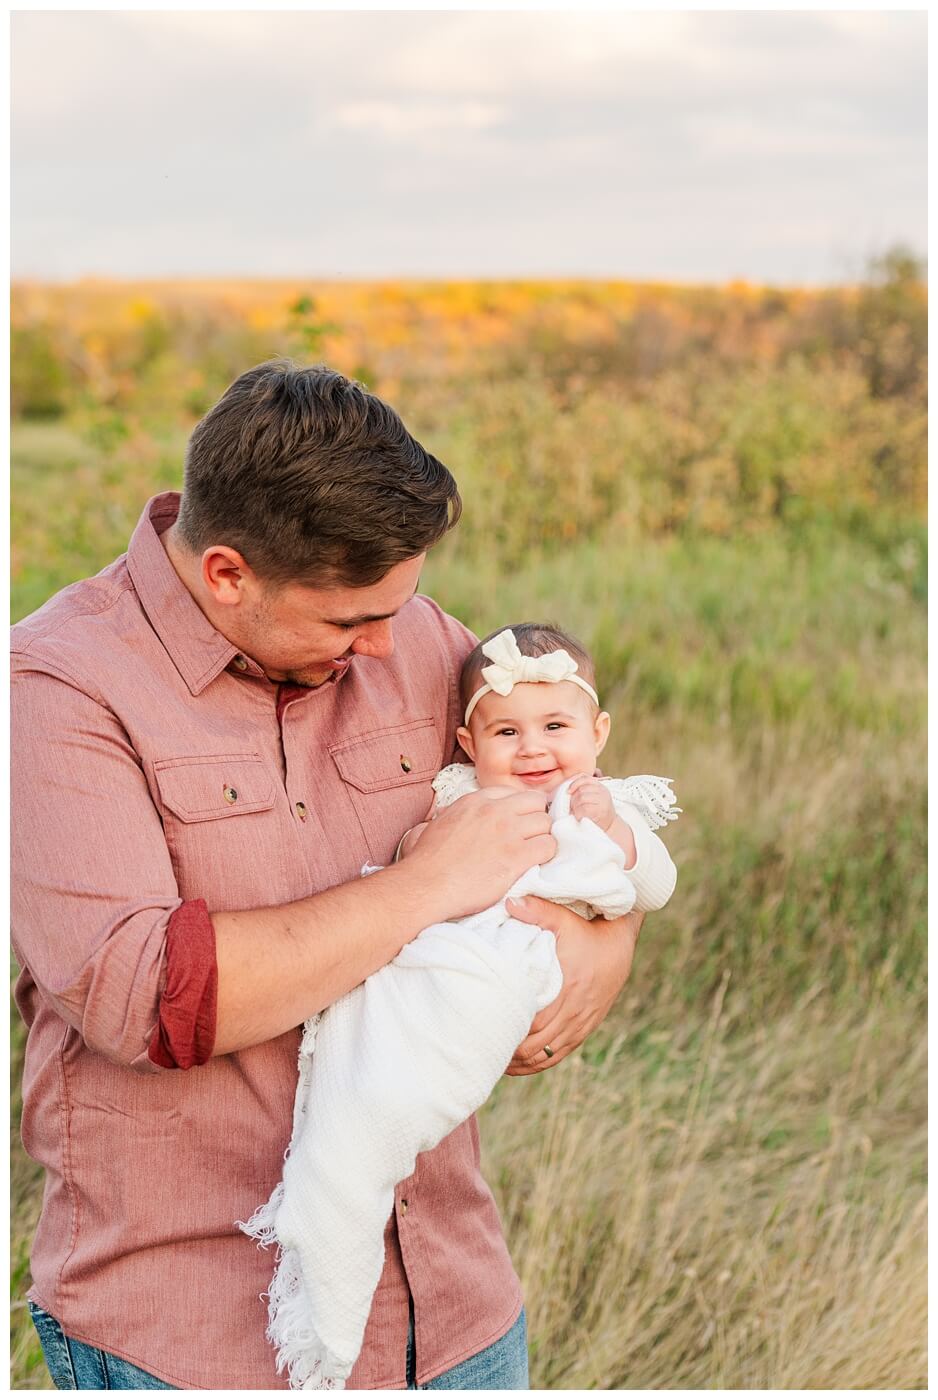 Hachkewich Family - Wascana Trails - 11 - Baby girl smiles in her dads arms